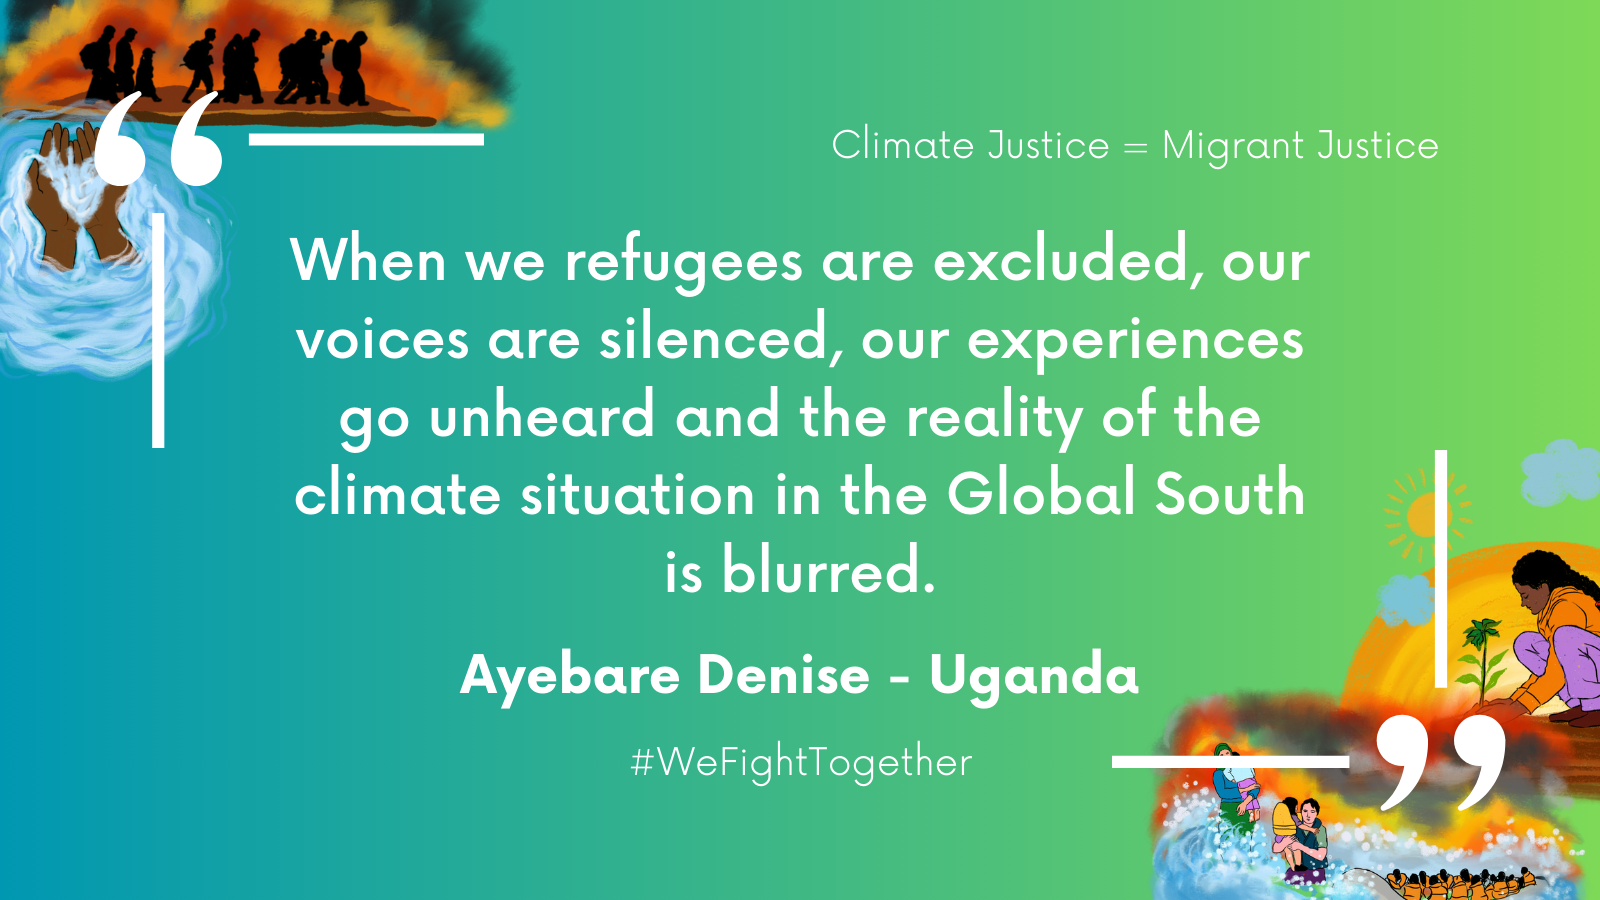 quote: When we refugees are excluded, our voices are silenced, our experiences go unheard and the reality of the climate situation in the Global South is blurred.